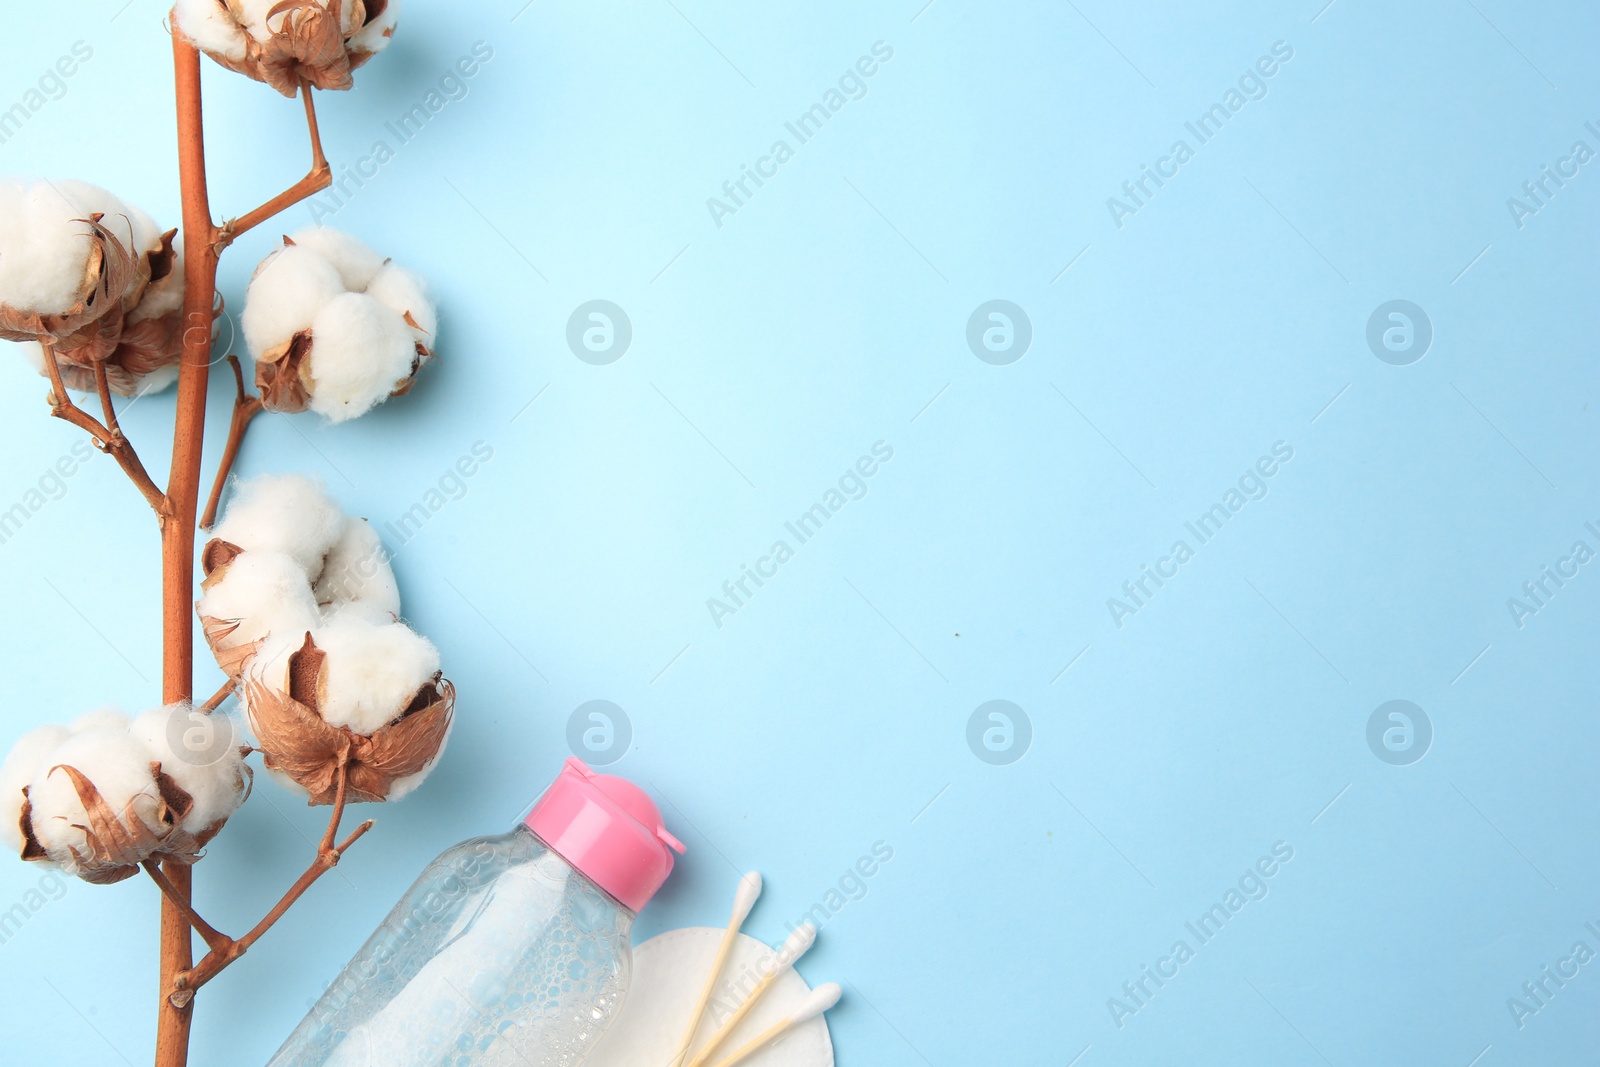 Photo of Bottle of makeup remover, cotton flowers, pad and swabs on light blue background, flat lay. Space for text